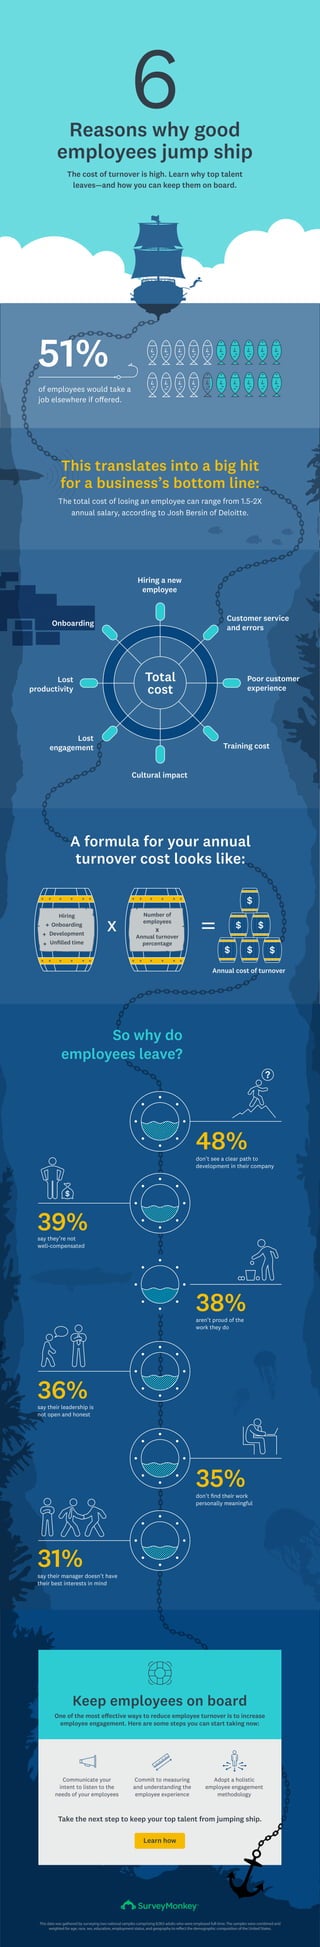 say they’re not
well-compensated
The cost of turnover is high. Learn why top talent
leaves—and how you can keep them on board.
A formula for your annual
turnover cost looks like:
The total cost of losing an employee can range from 1.5-2X
annual salary, according to Josh Bersin of Deloitte.
Reasons why good
employees jump ship
don’t see a clear path to
development in their company
6
So why do
employees leave?
48%
38%
39%
36%
35%
31%
aren’t proud of the
work they do
don’t ﬁnd their work
personally meaningful
say their leadership is
not open and honest
say their manager doesn’t have
their best interests in mind
of employees would take a
job elsewhere if oﬀered.
51%
One of the most eﬀective ways to reduce employee turnover is to increase
employee engagement. Here are some steps you can start taking now:
Take the next step to keep your top talent from jumping ship.
Keep employees on board
Learn how
Communicate your
intent to listen to the
needs of your employees
Commit to measuring
and understanding the
employee experience
Adopt a holistic
employee engagement
methodology
This translates into a big hit
for a business’s bottom line:
X
$ $ $
$ $
$
Annual cost of turnover
Poor customer
experience
Customer service
and errors
Training cost
Cultural impact
Onboarding
Hiring a new
employee
Lost
productivity
Lost
engagement
Total
cost
Number of
employees
Annual turnover
percentage
X
Hiring
Onboarding
Development
Unﬁlled time
+
+
+
This data was gathered by surveying two national samples comprising 8,003 adults who were employed full-time. The samples were combined and
weighted for age, race, sex, education, employment status, and geography to reflect the demographic composition of the United States.
?
$
 